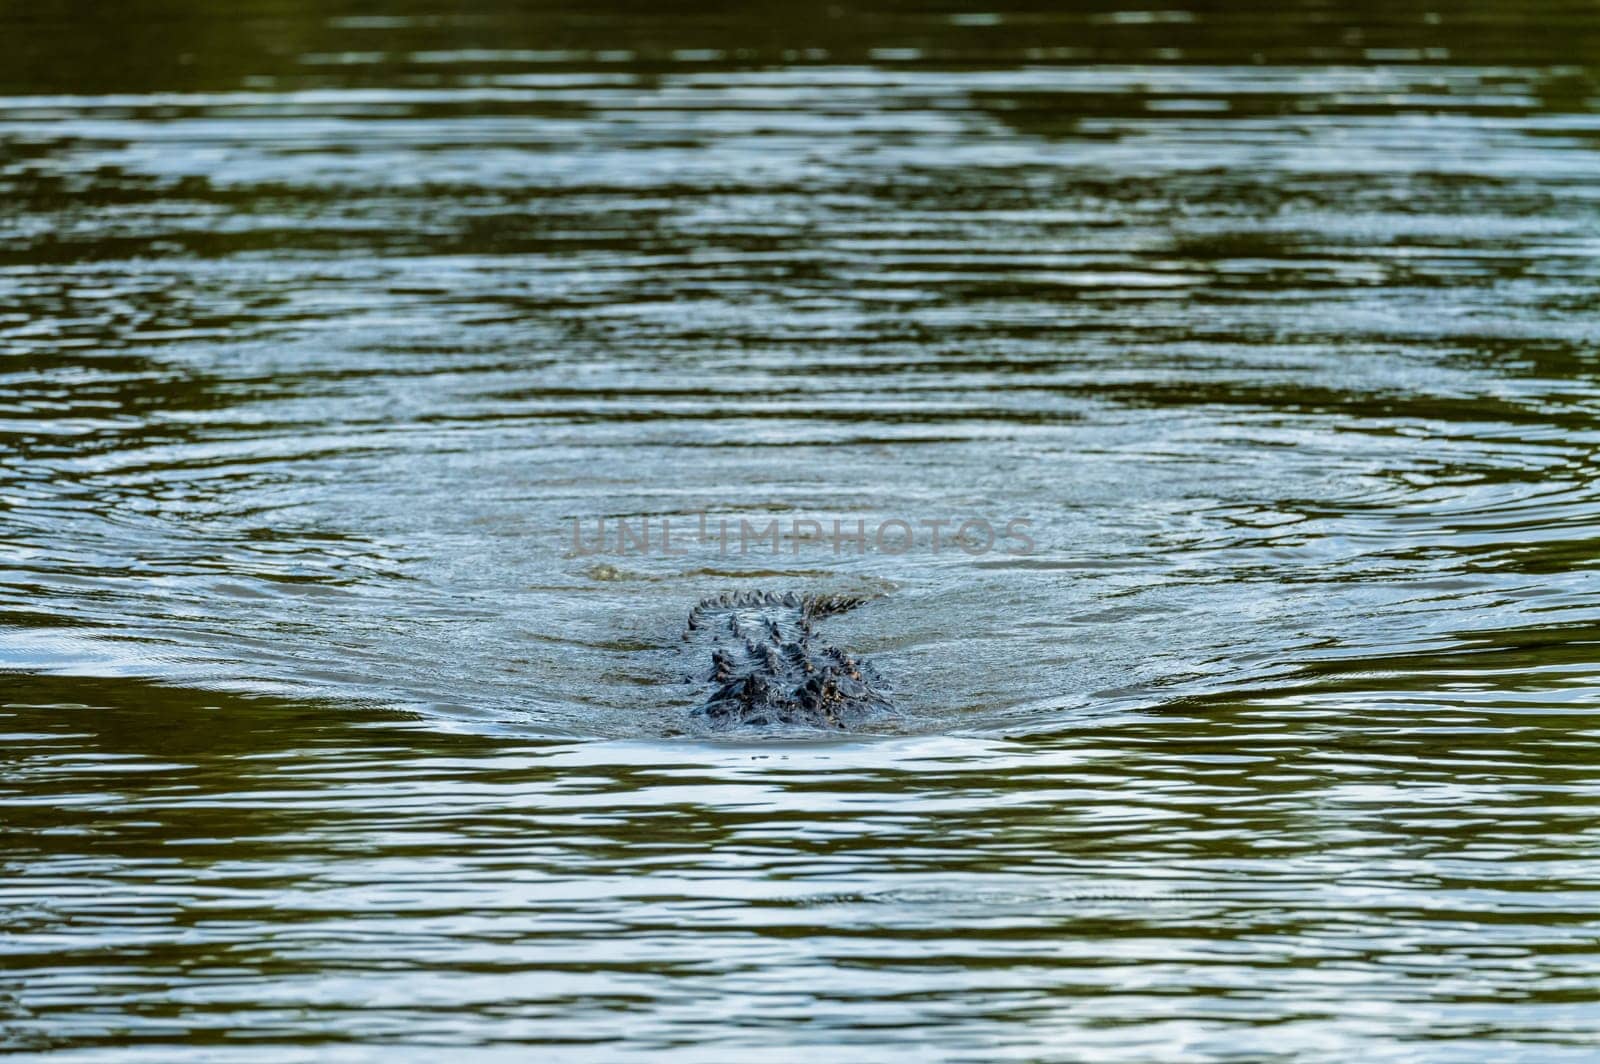 American alligator approaching across calm waters of Atchafalaya basin by steheap